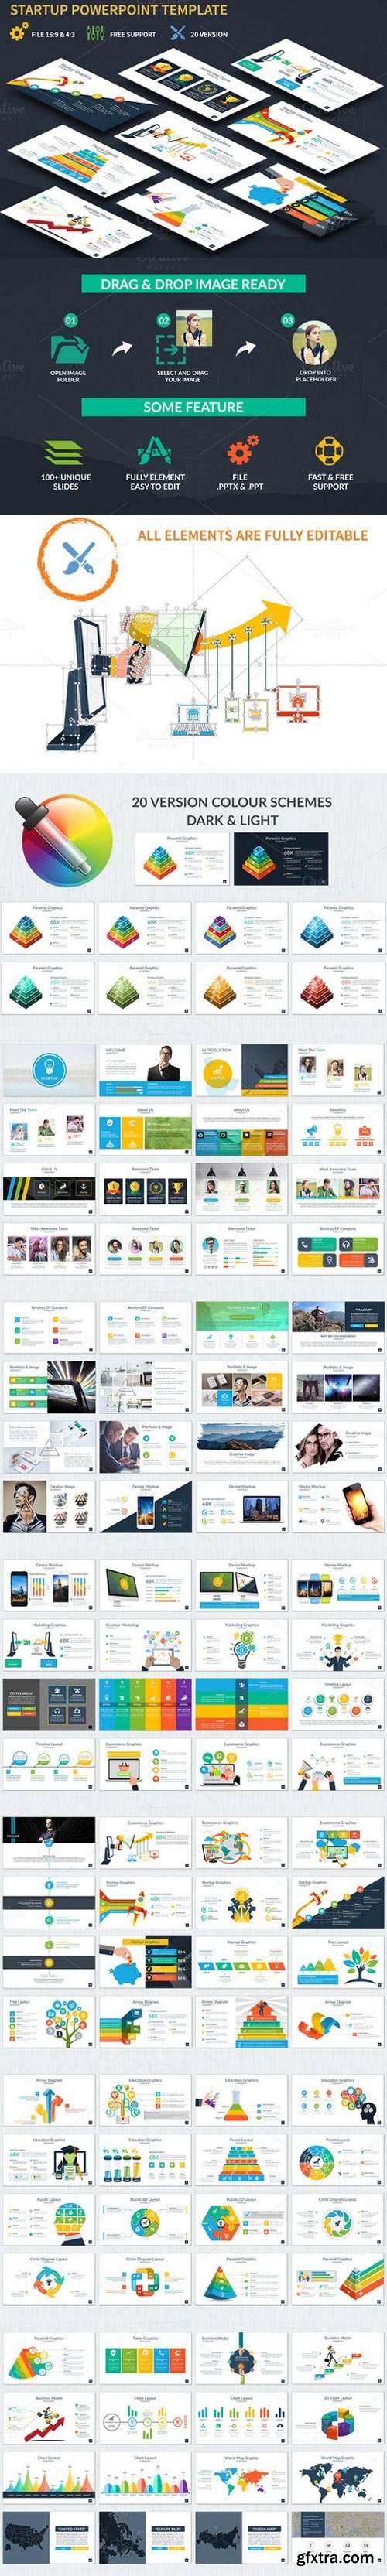 CM - Startup Powerpoint Template 829964